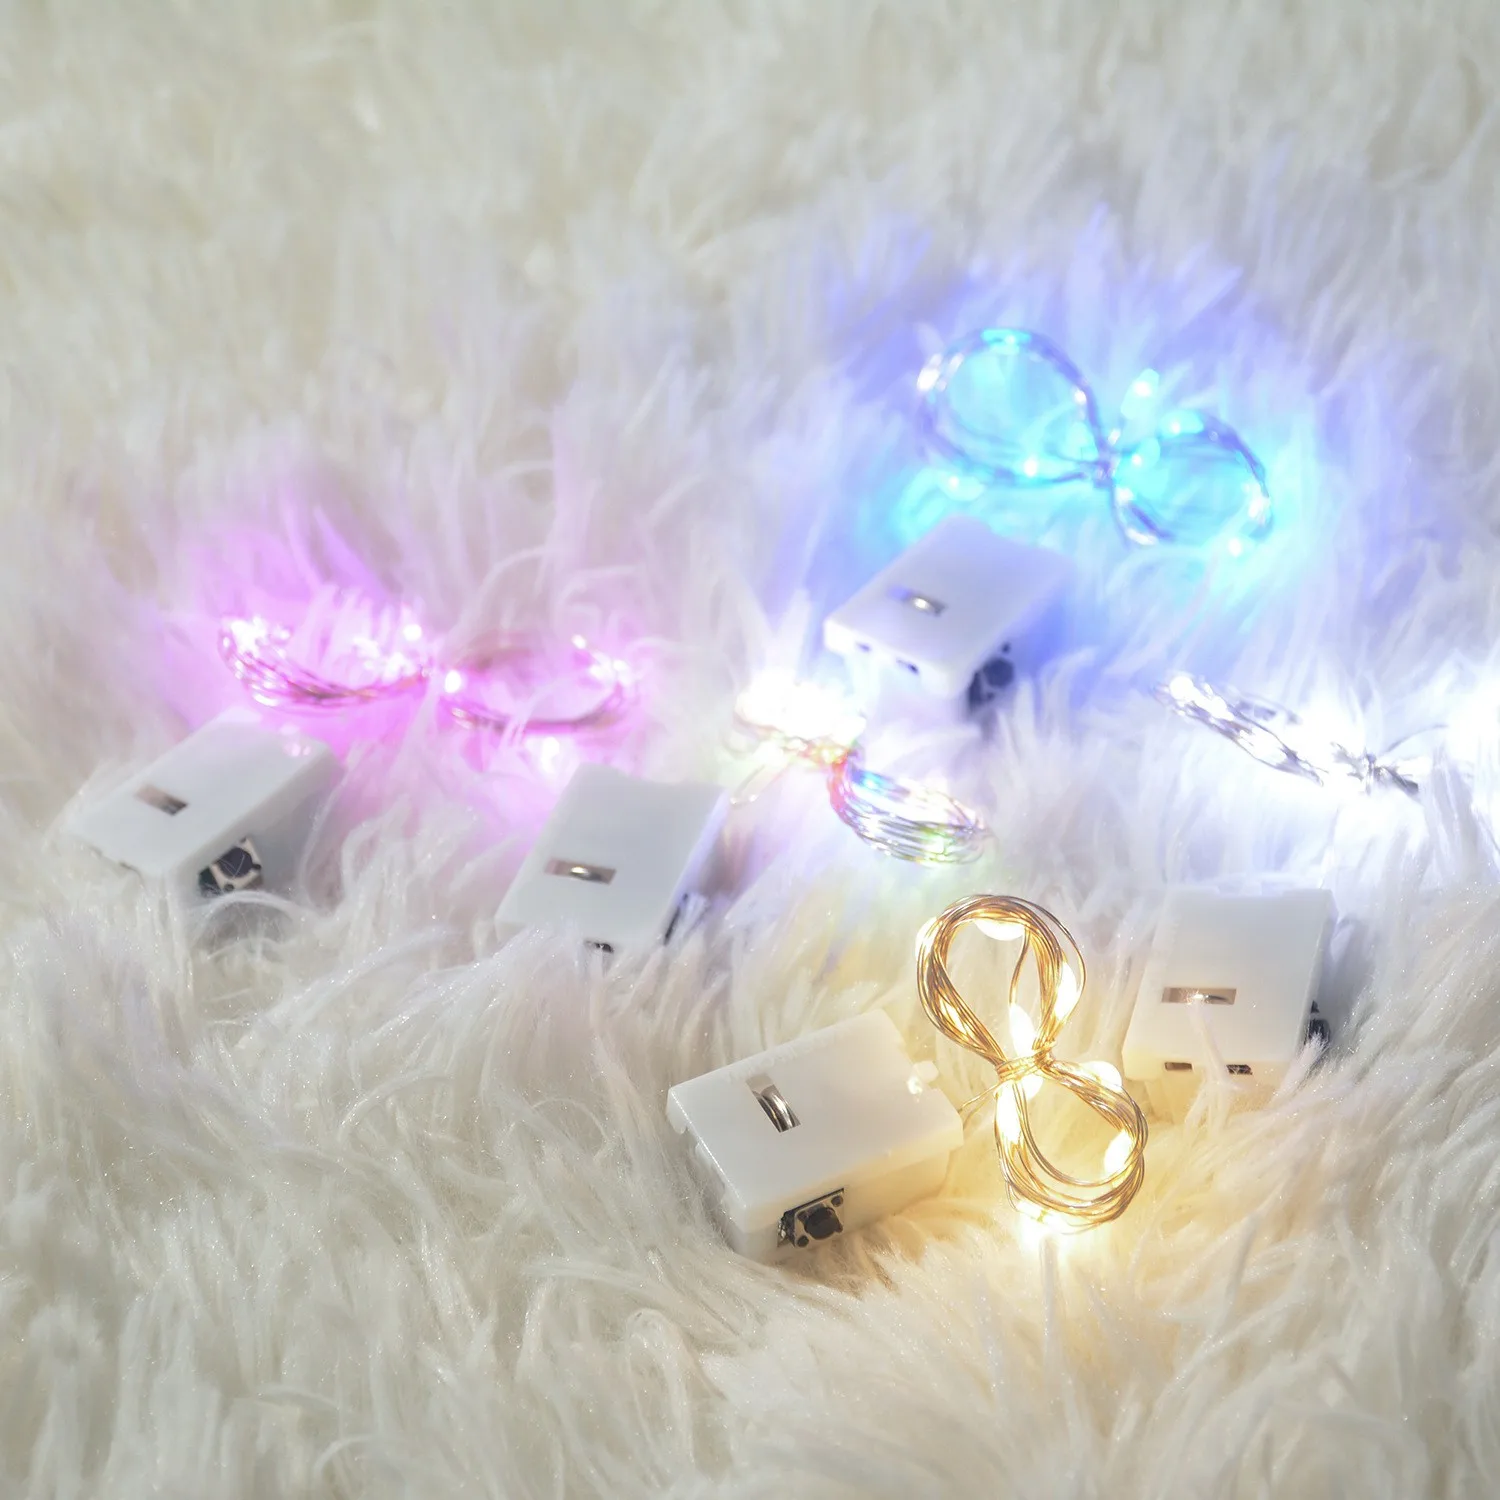 6PC/Lot string light led garland 1m 2m 3m Gift Decorate lighting For Tree Flower Christmas Wedding Party Patio New Year Decor images - 6